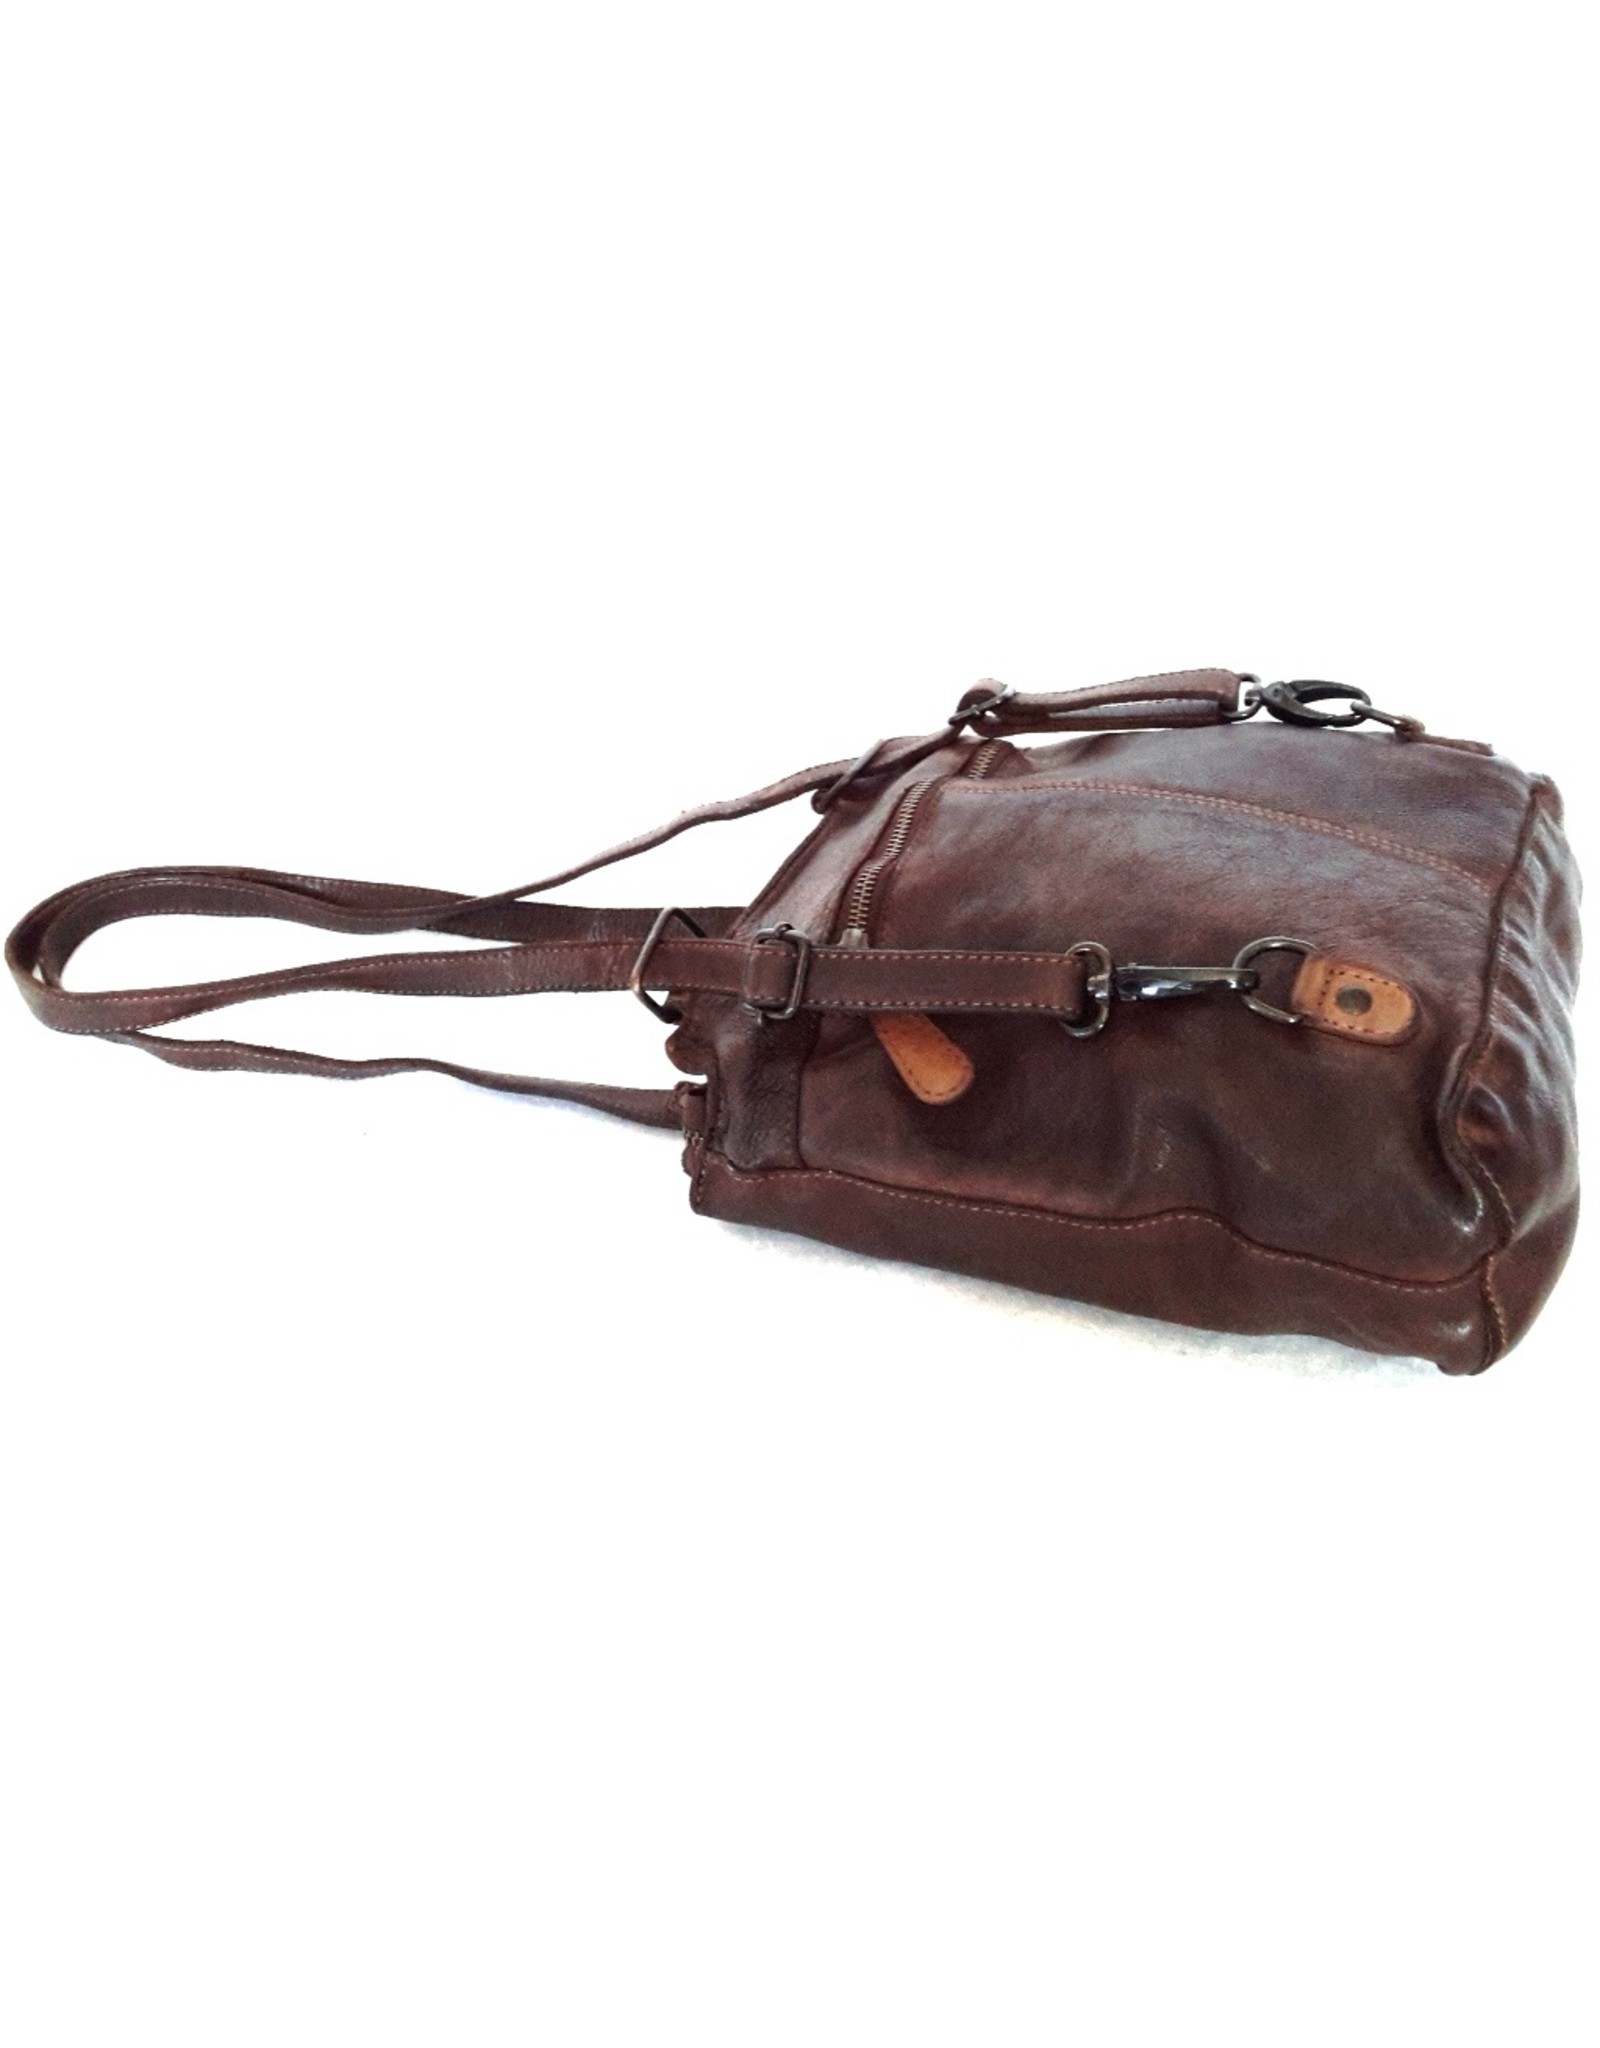 HillBurry Leather backpacks Leather shoppers - HillBurry shoulder bag - backpack from washed leather